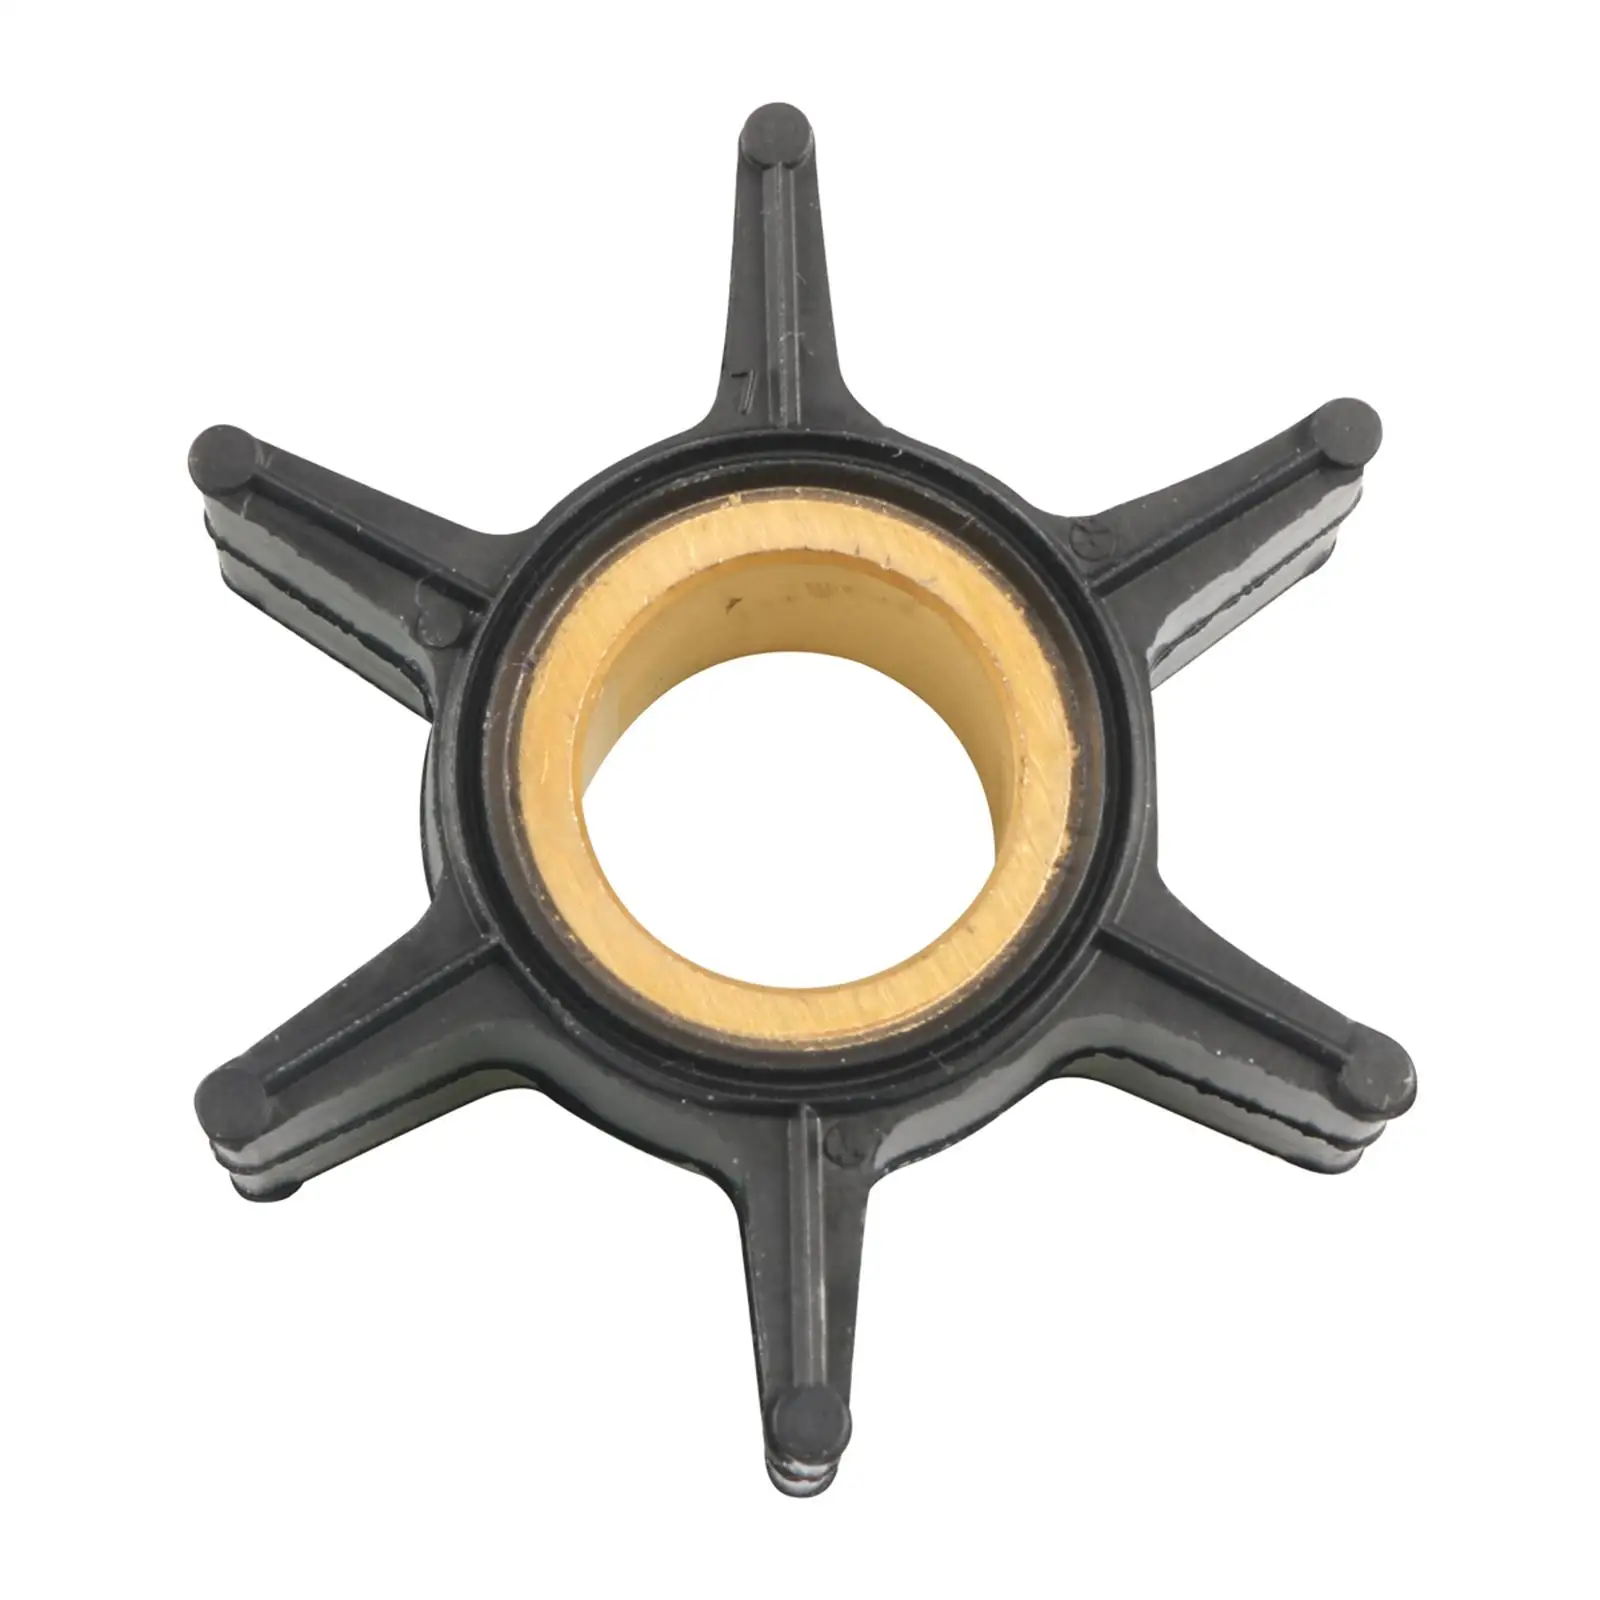 Water Pump Impeller 395289 Fit for Johnson 2 Stroke 20HP 25HP 28HP Direct Replaces Spare Parts Easy to Install High Performance